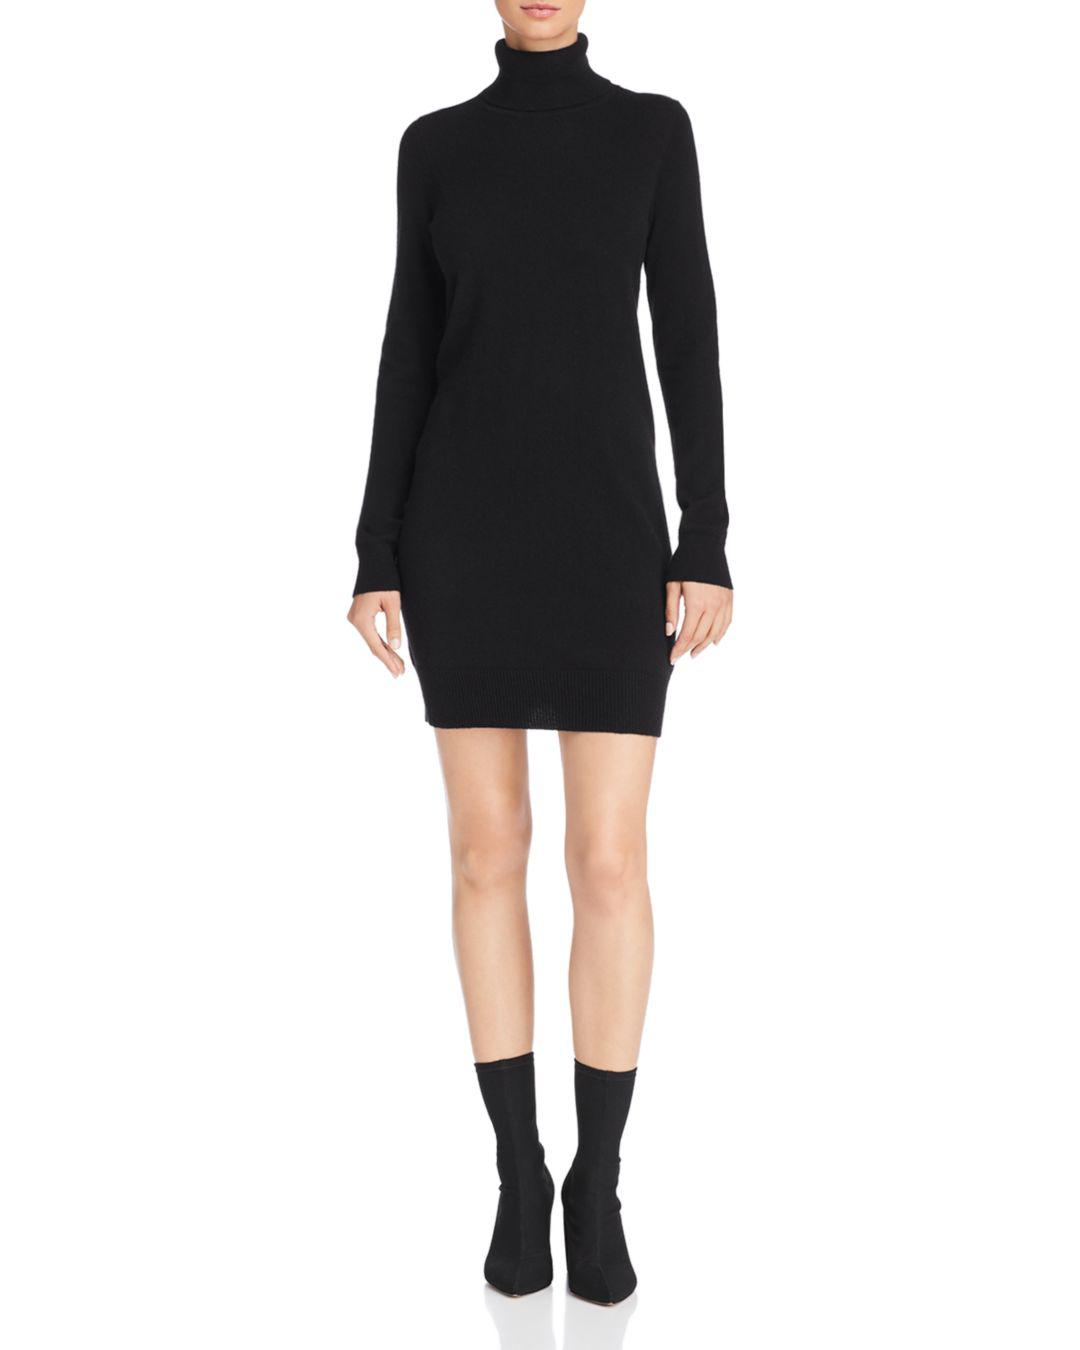 Theory Cashmere Turtleneck Dress in Black - Lyst